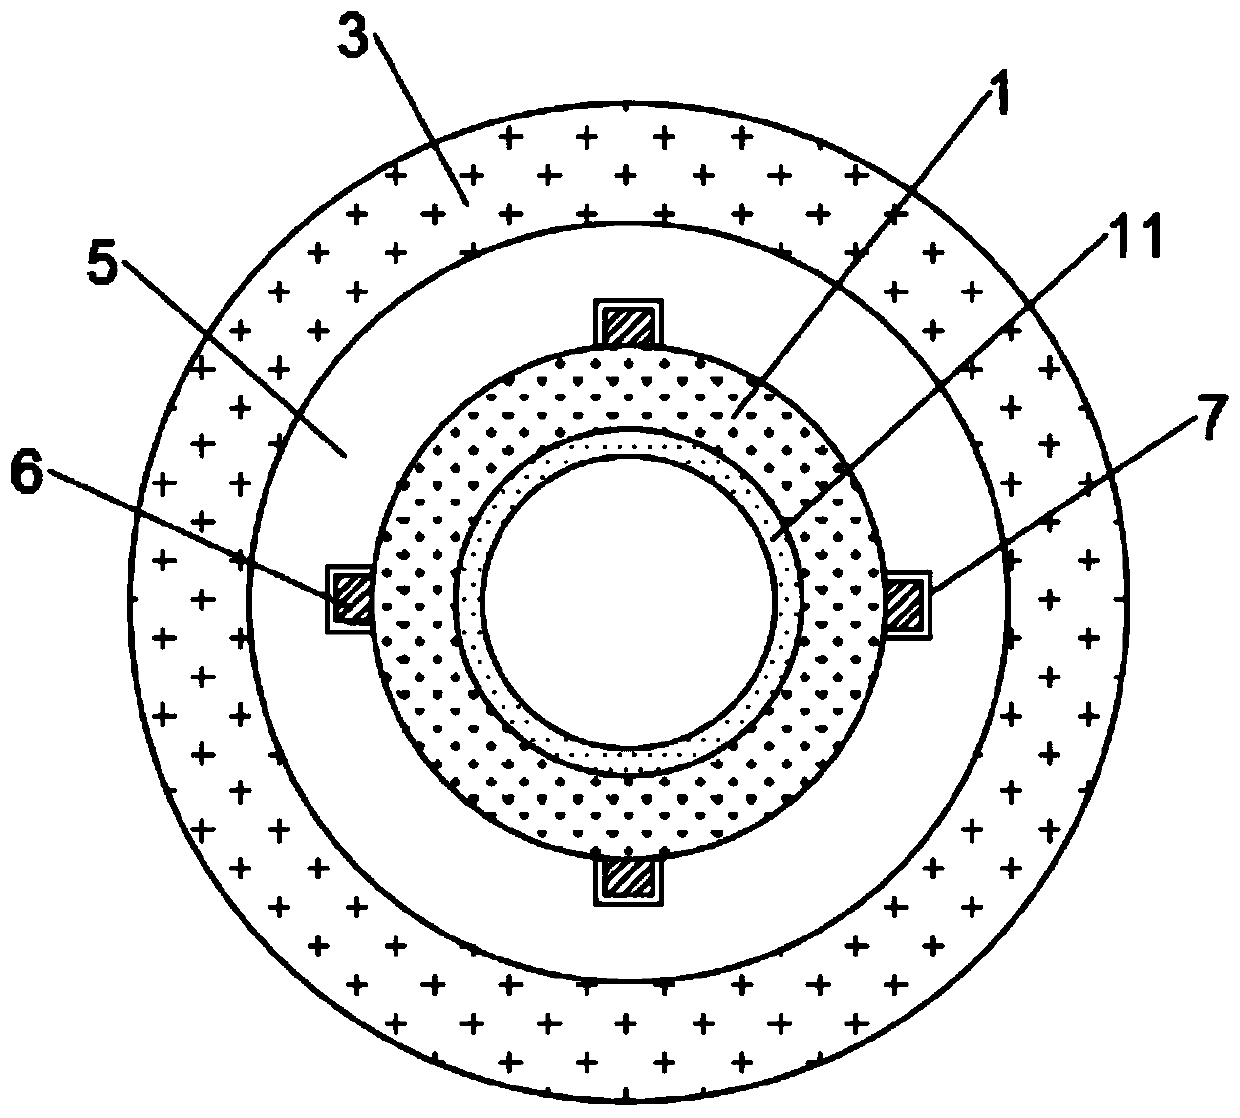 A semi-rigid cable welding void rate control method and supporting tooling